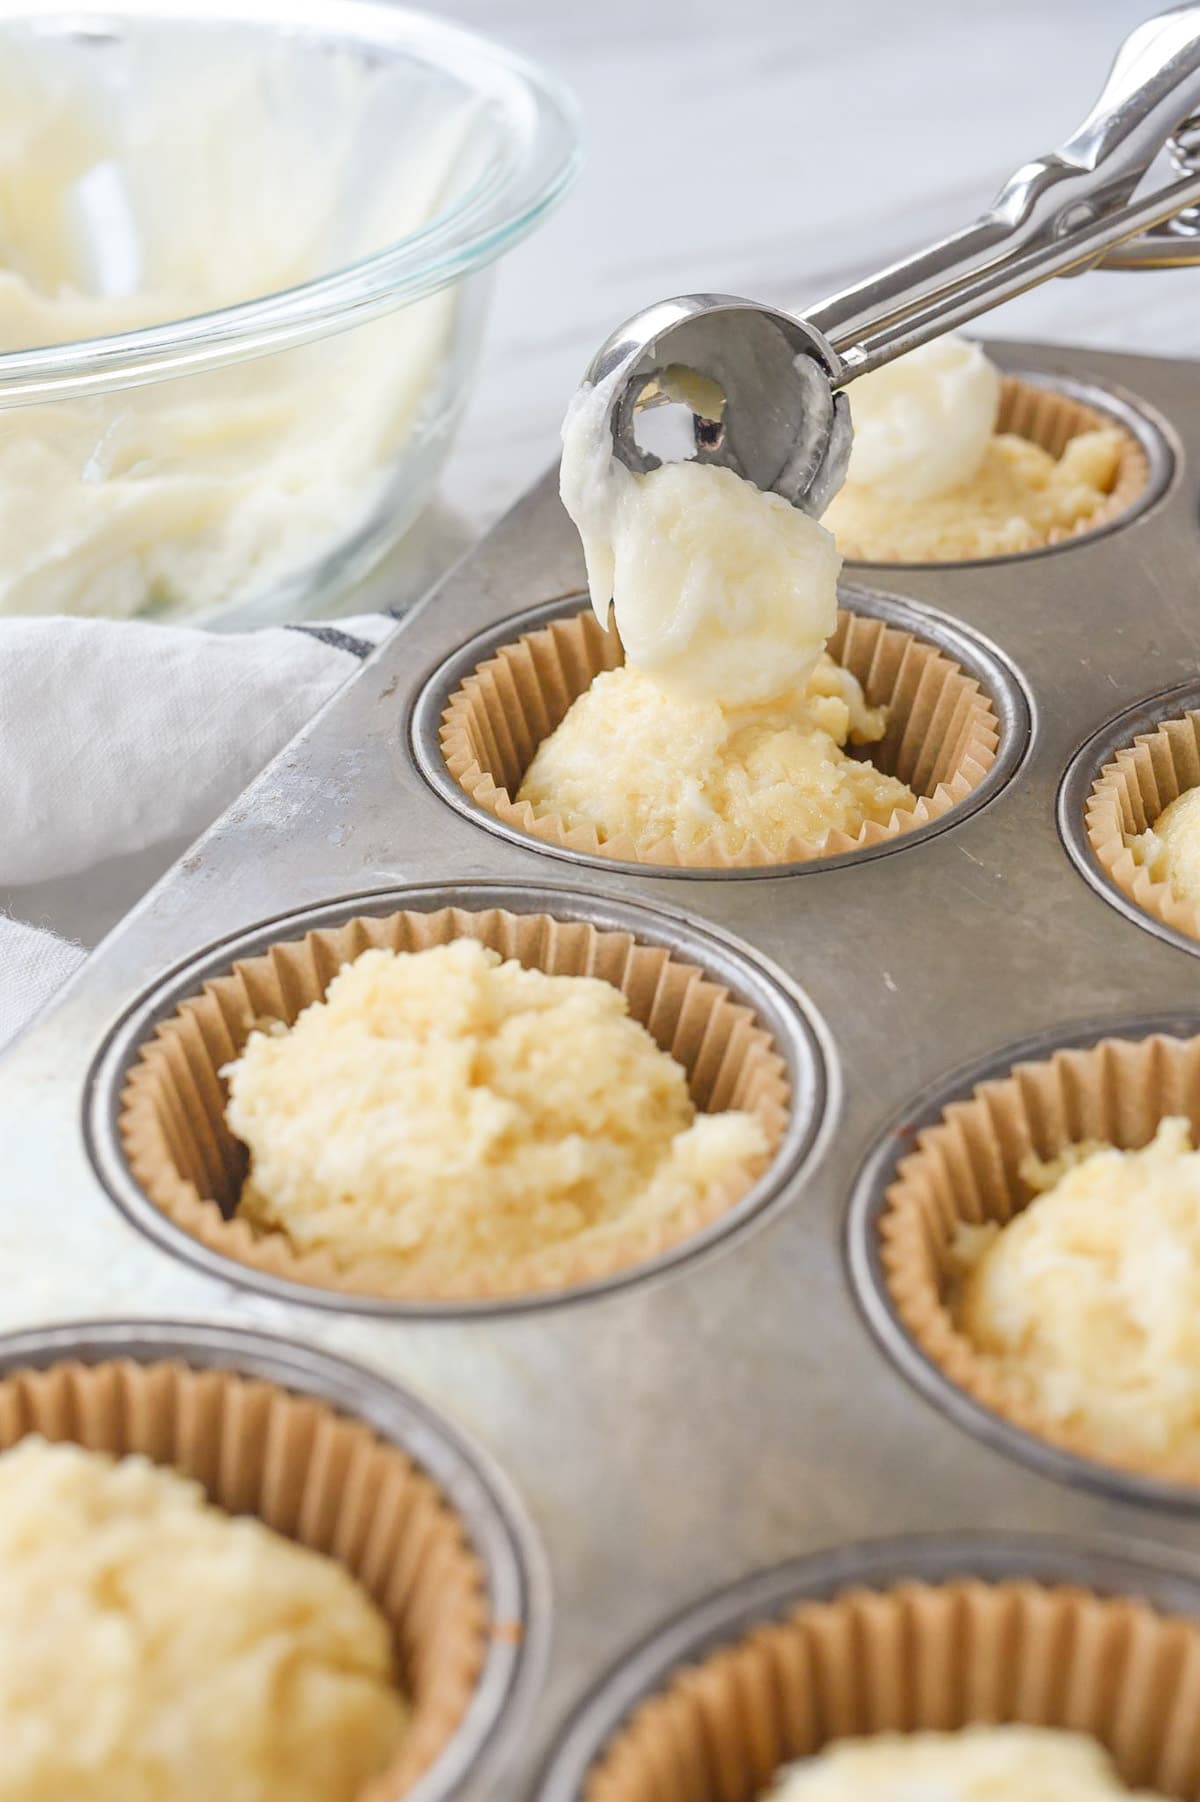 scoops of cream cheese filling on muffins